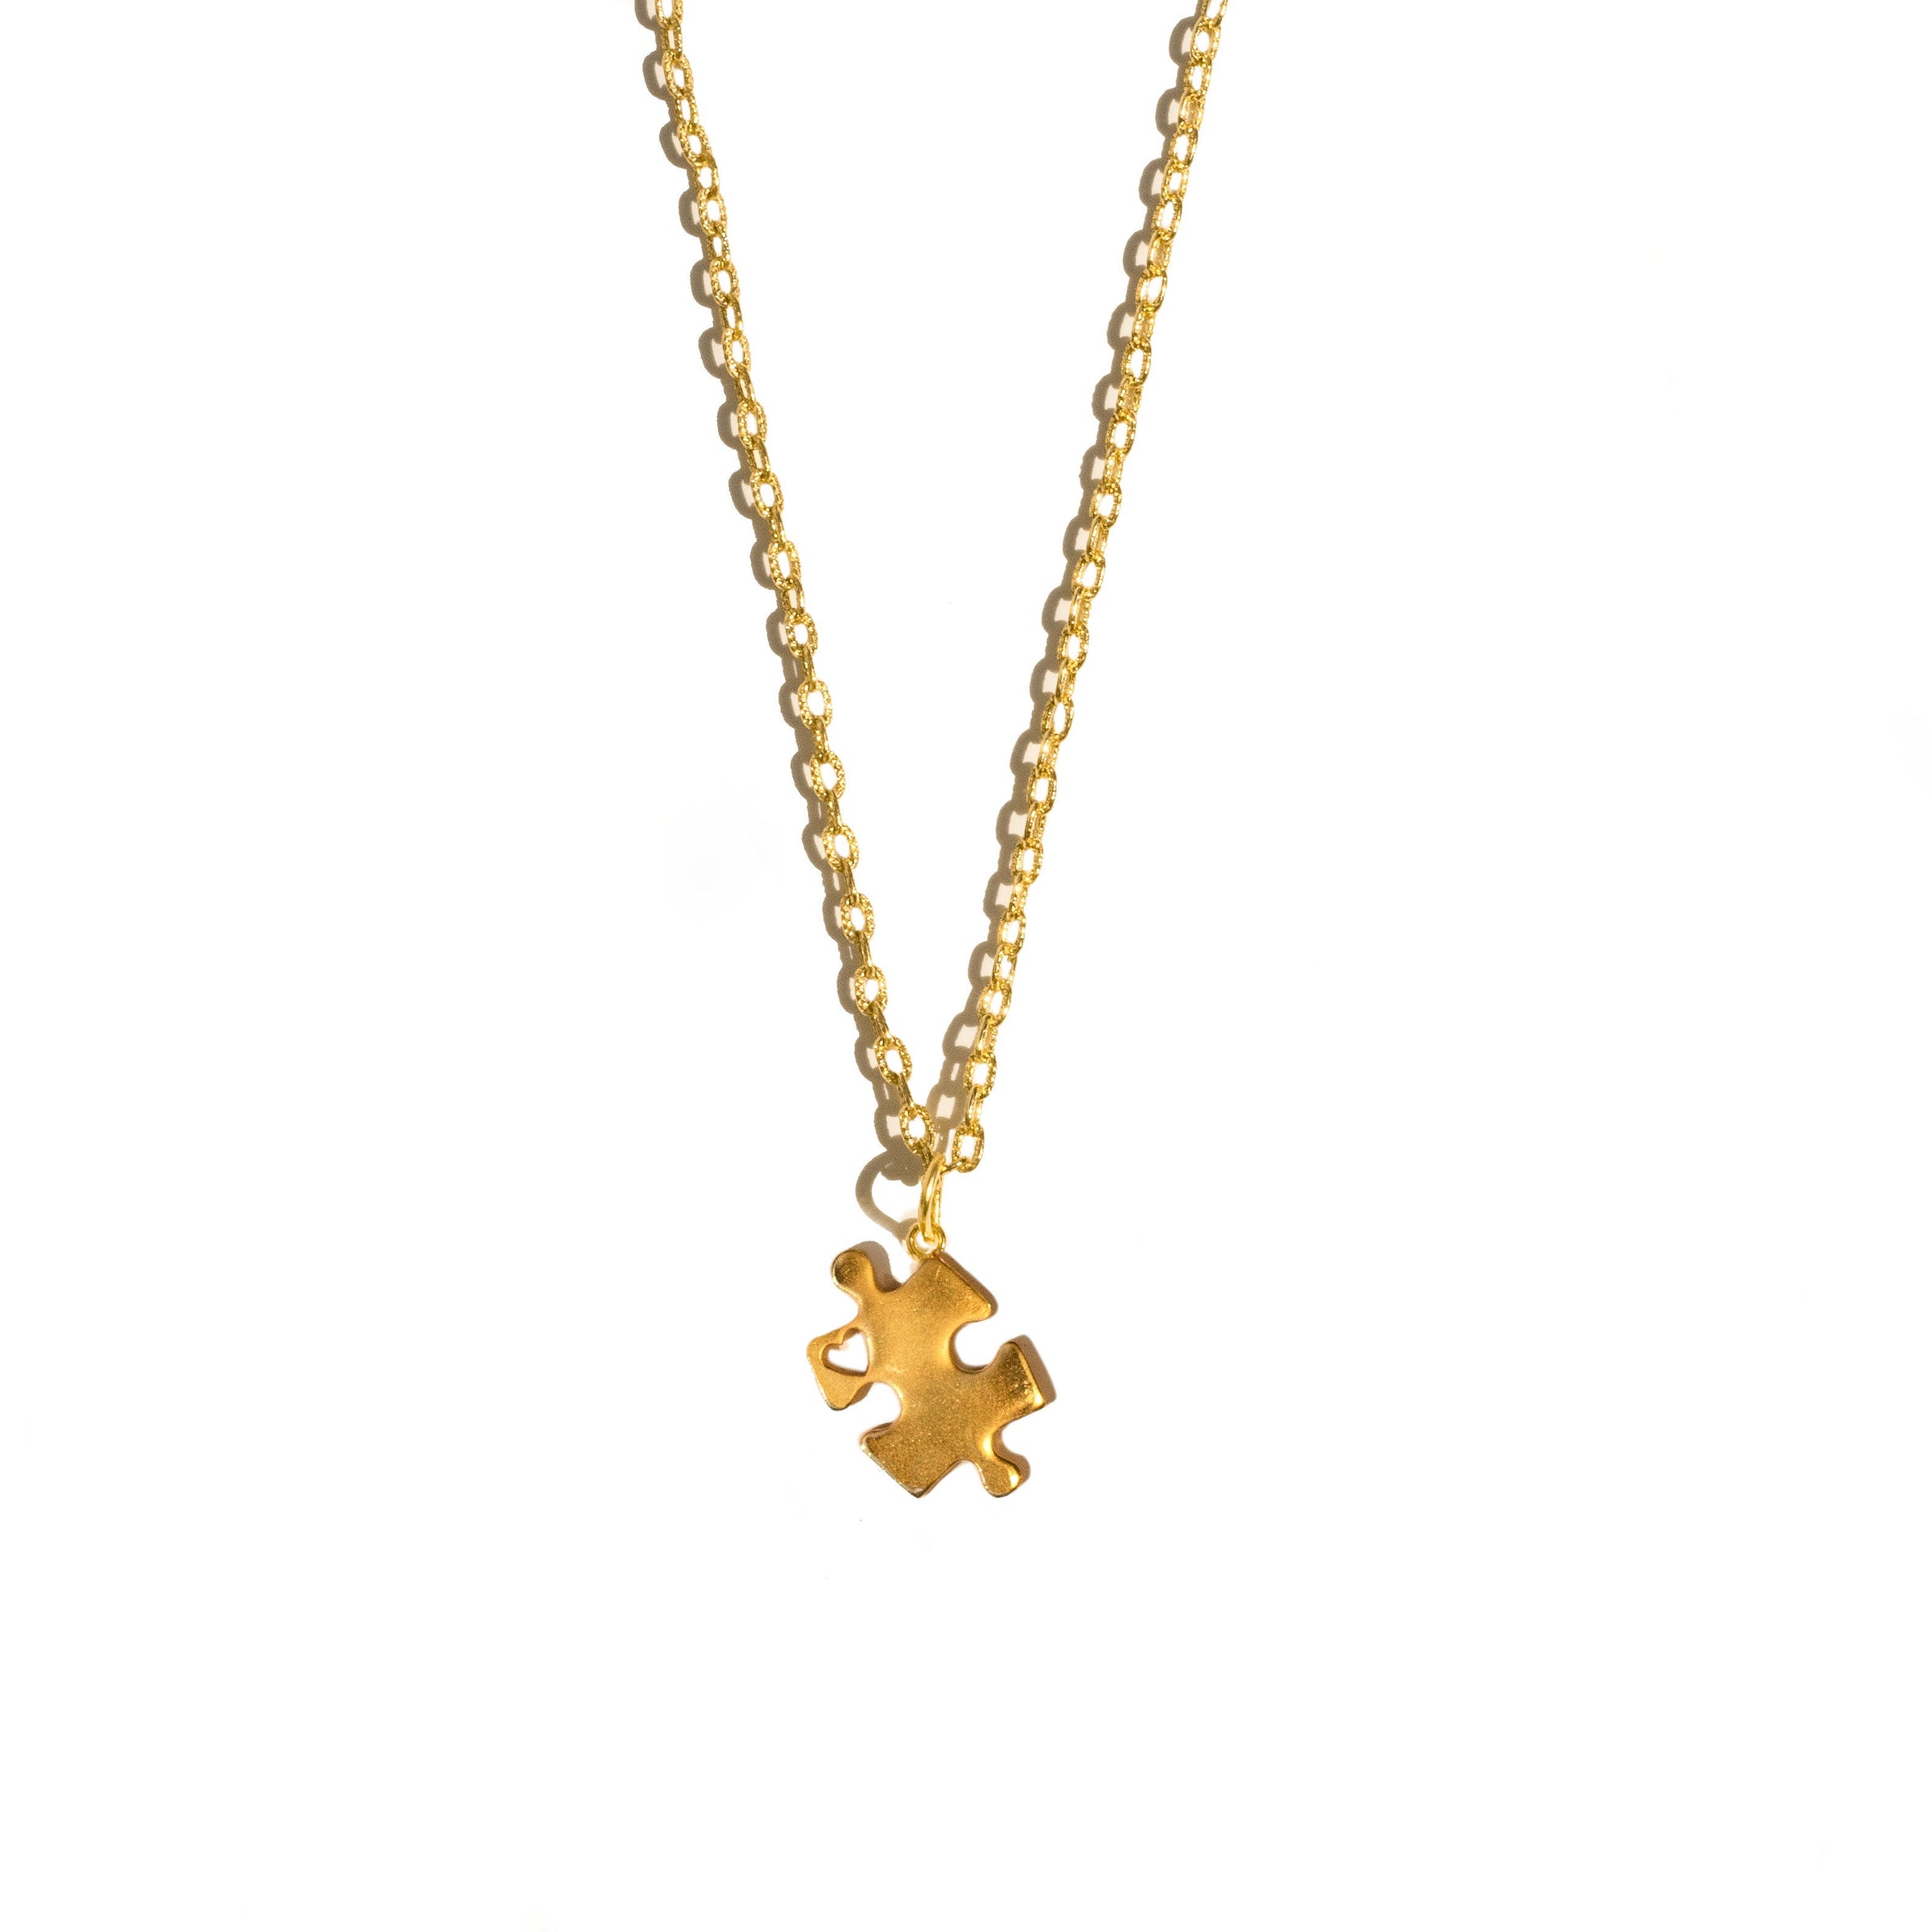 Gold necklace with a jigsaw puzzle piece charm